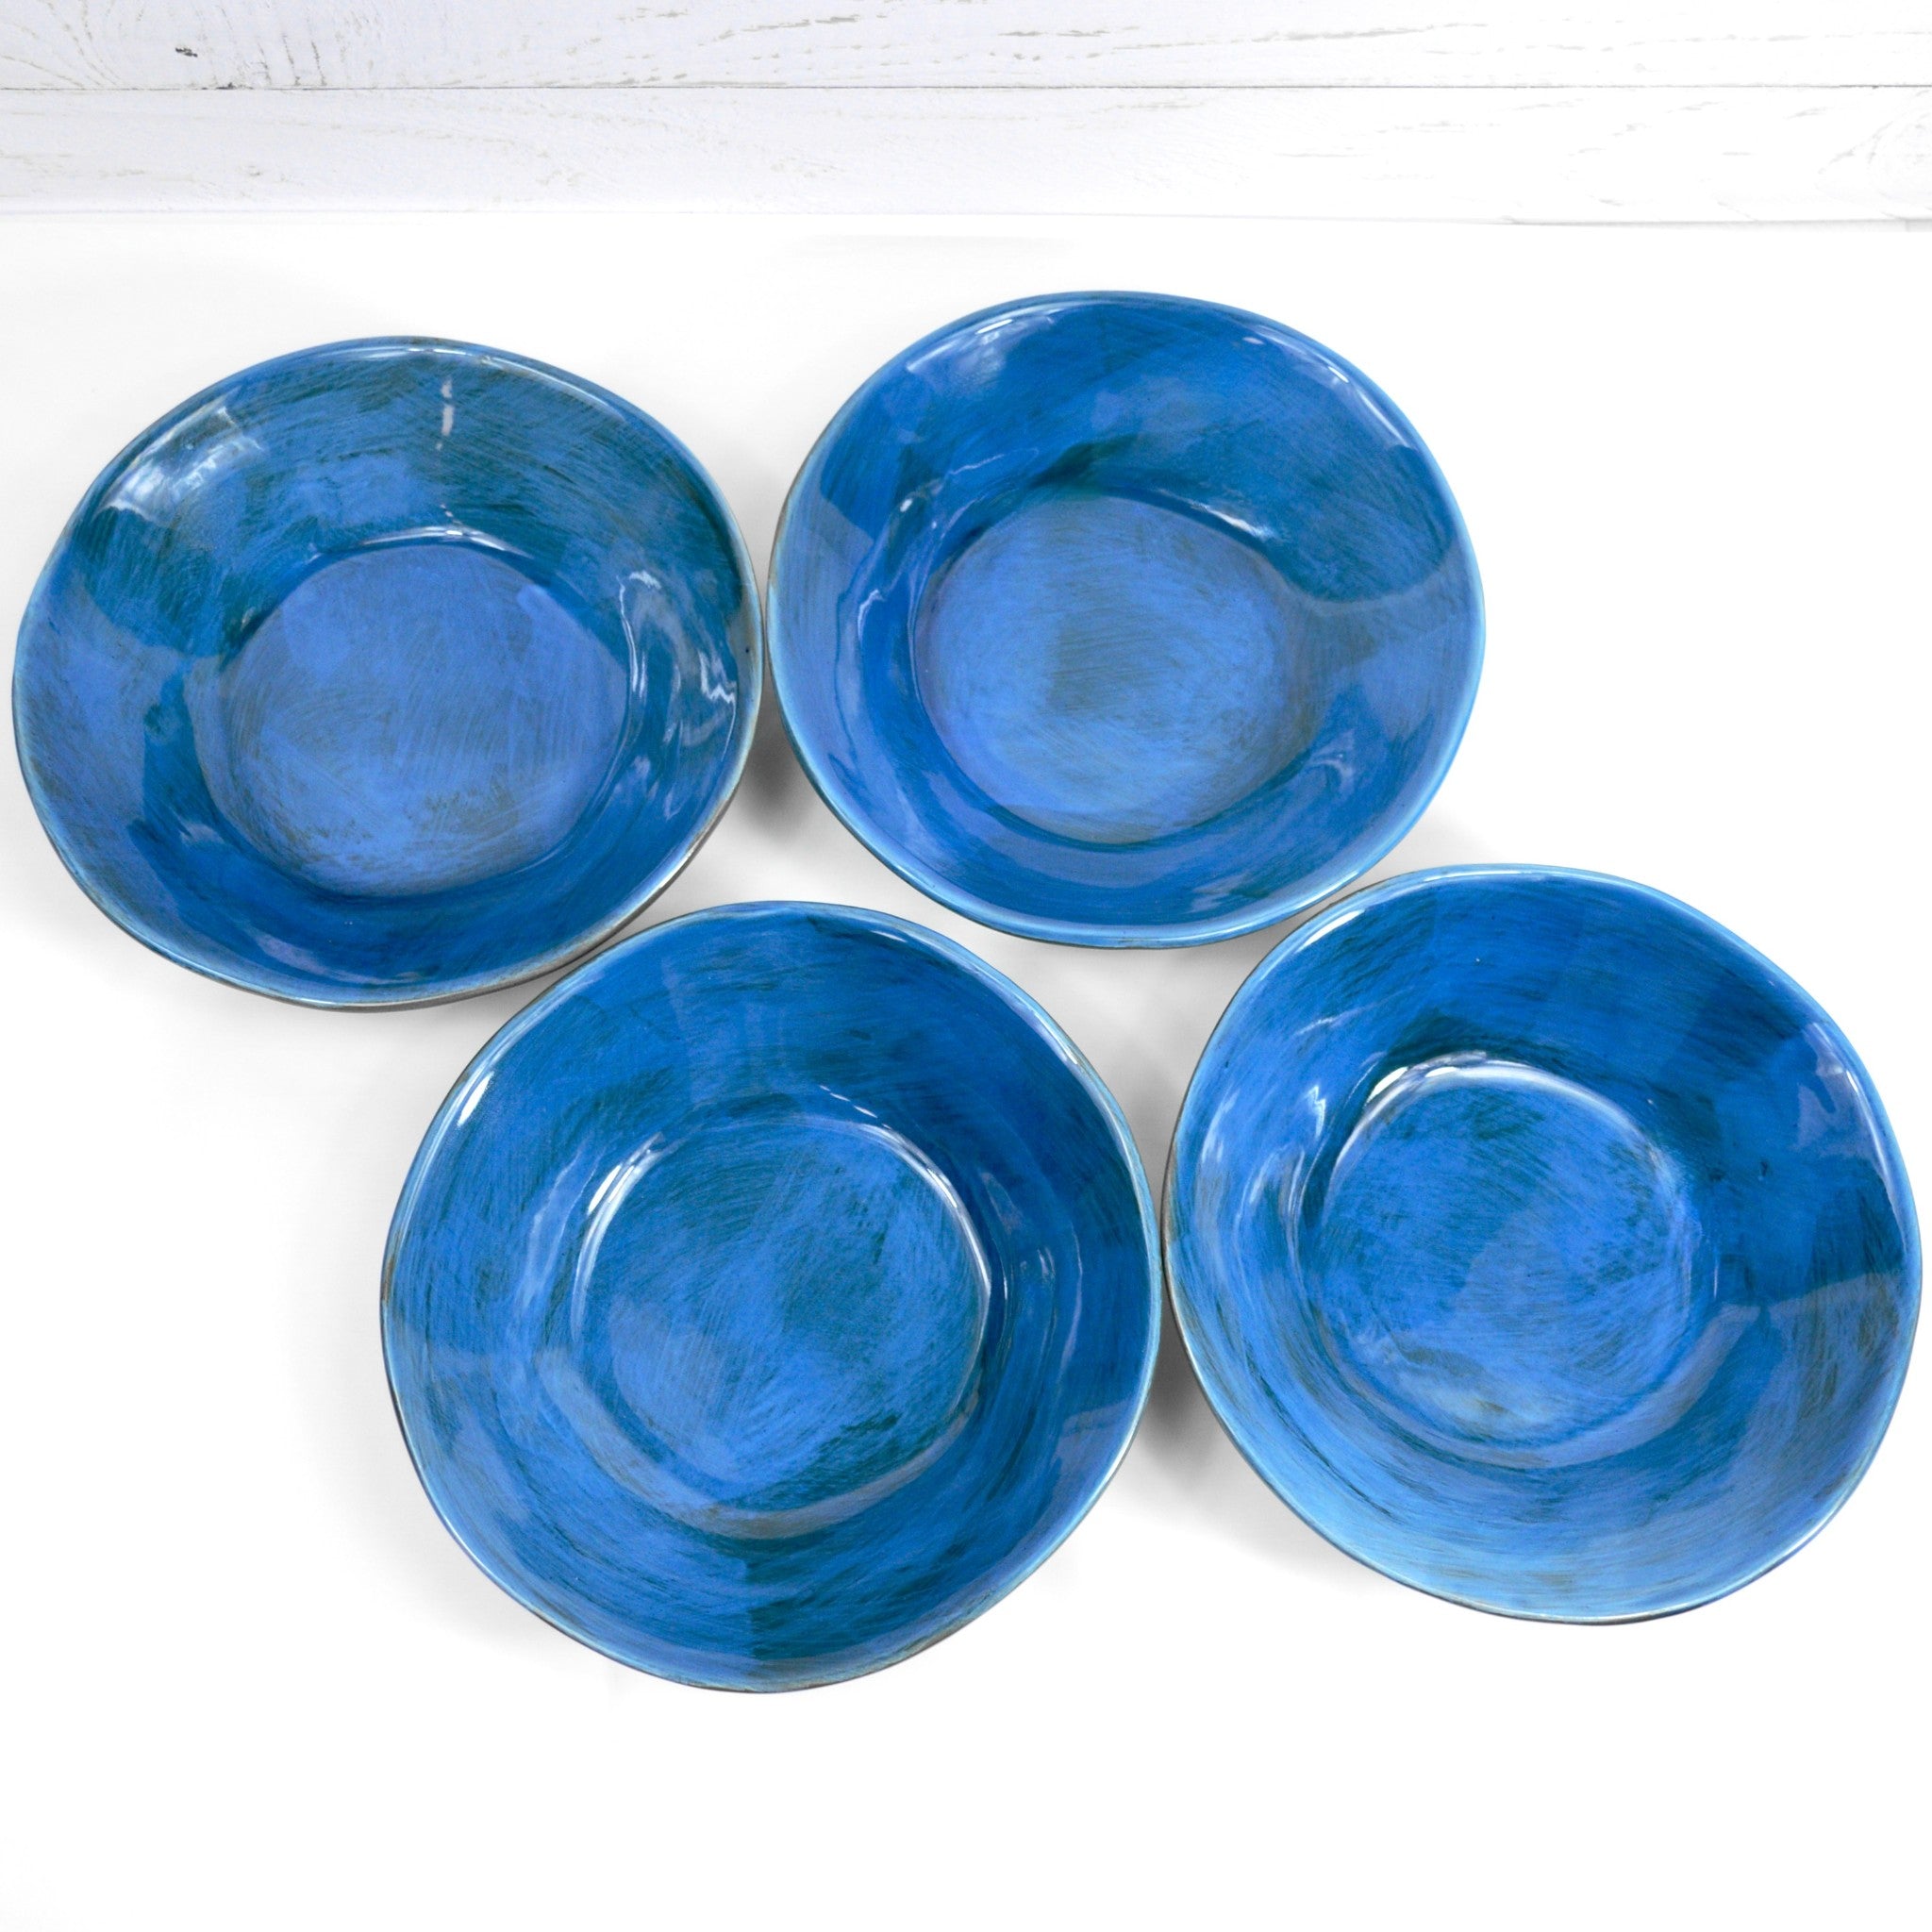 Tuscan Ceramic Dipping Bowls, Set of 4, Made in Italy